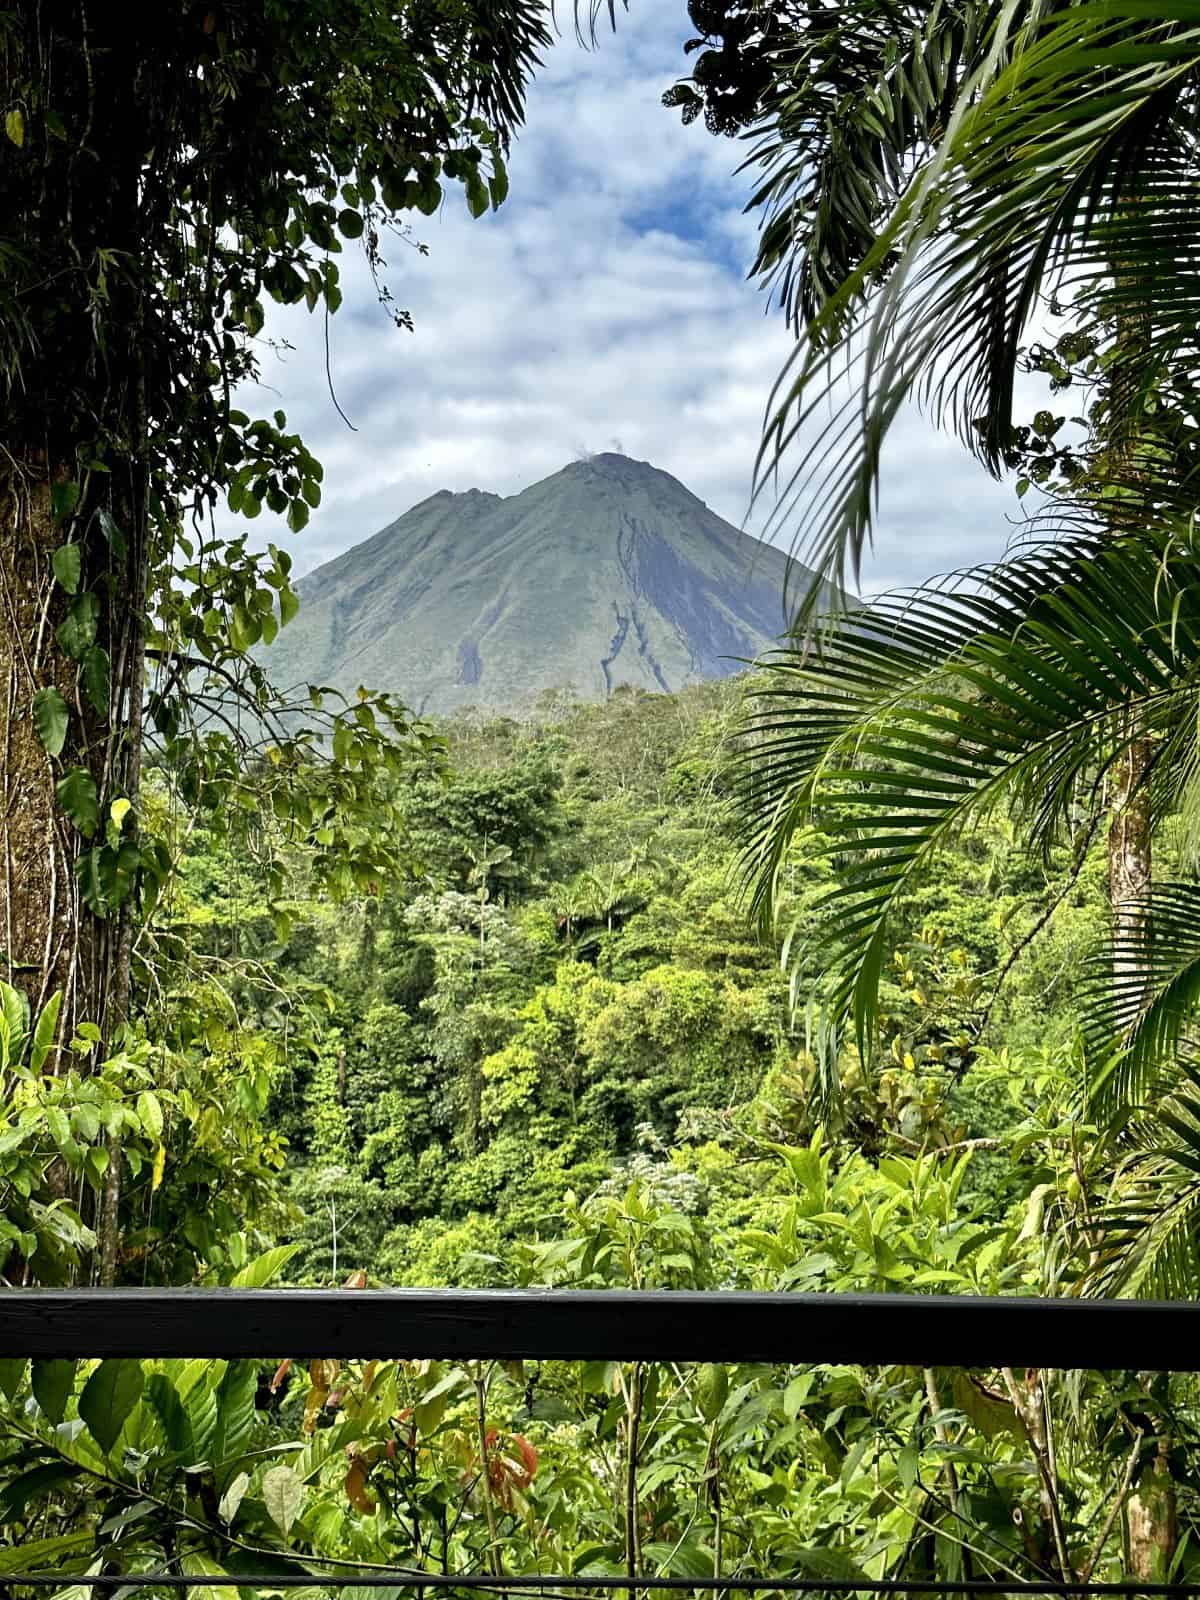 Amor Arenal hotel review - what to expect from this boutique Costa Rica luxury resort, nestled in the La Fortuna rainforest, with private balcony views of the Arenal Volcano